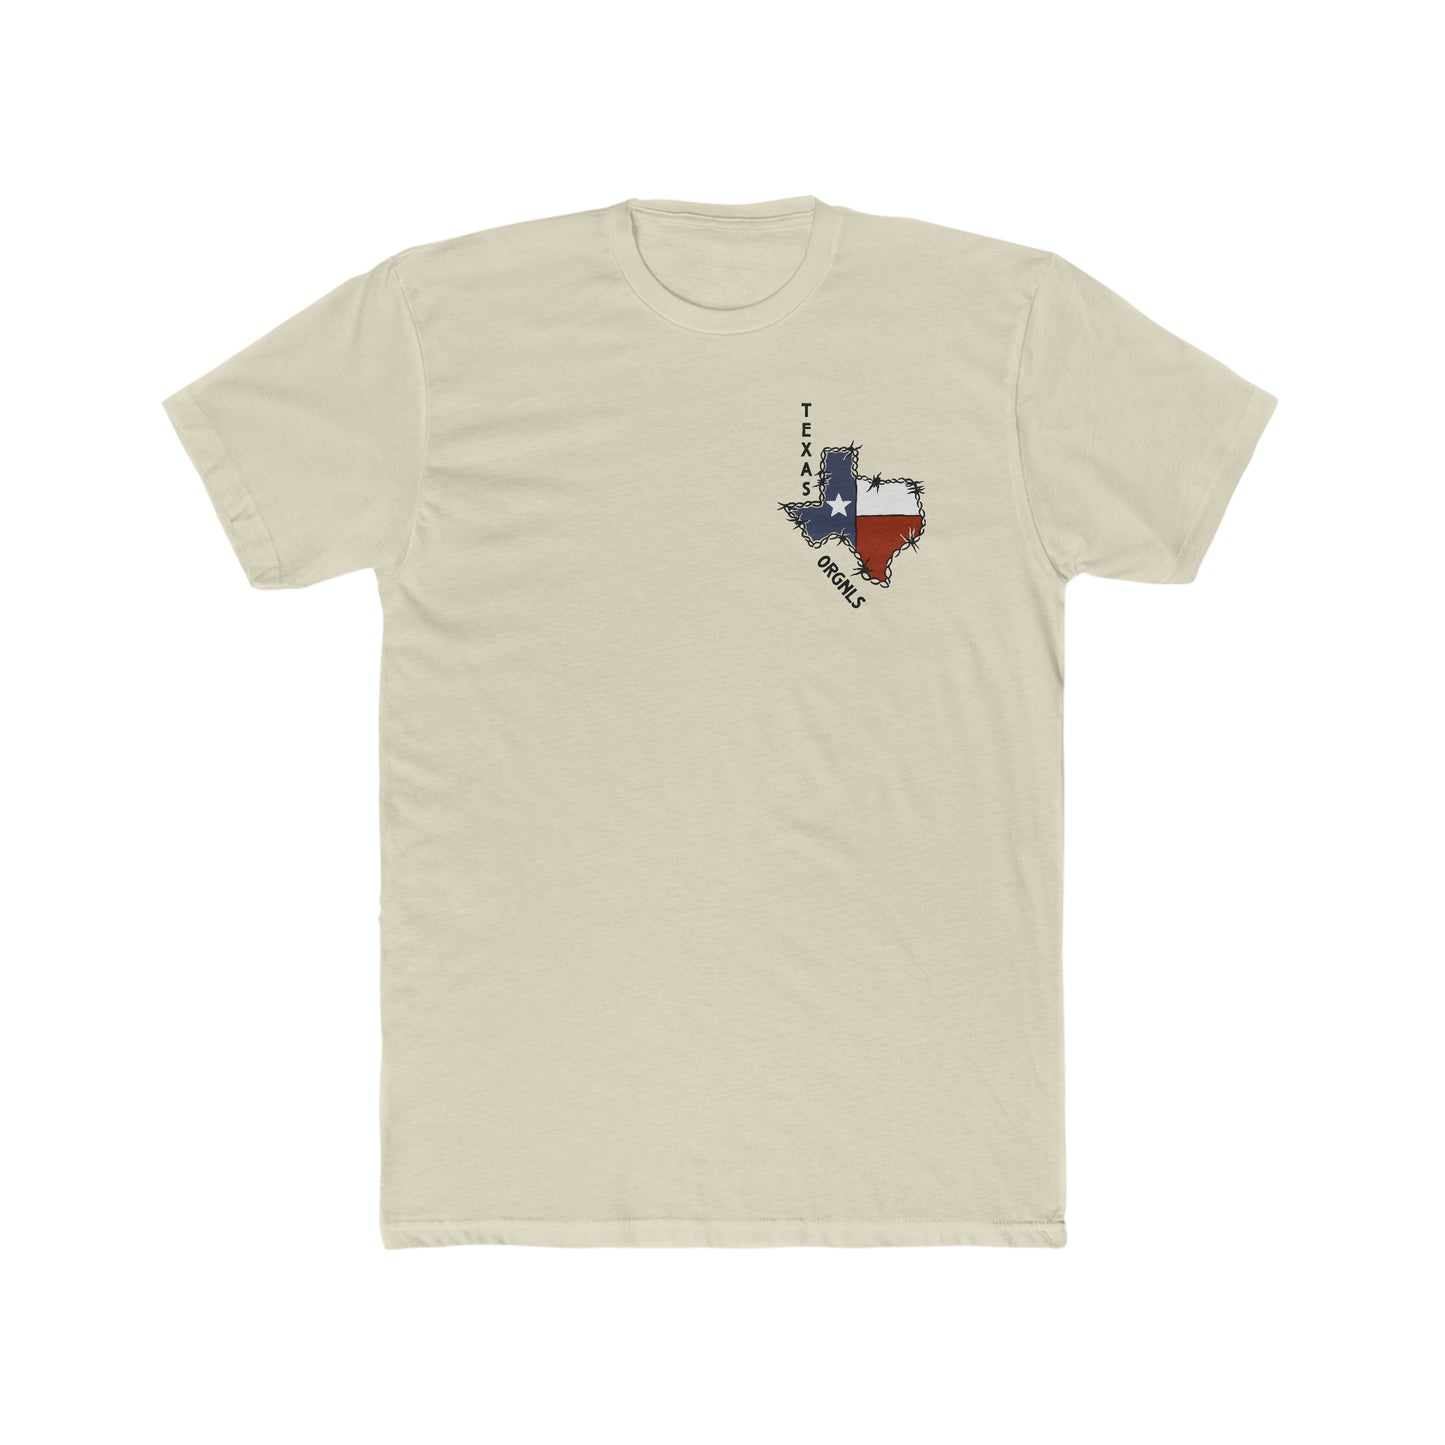 Texas Orgnls “Barbed Wire Texas” Unisex Tee